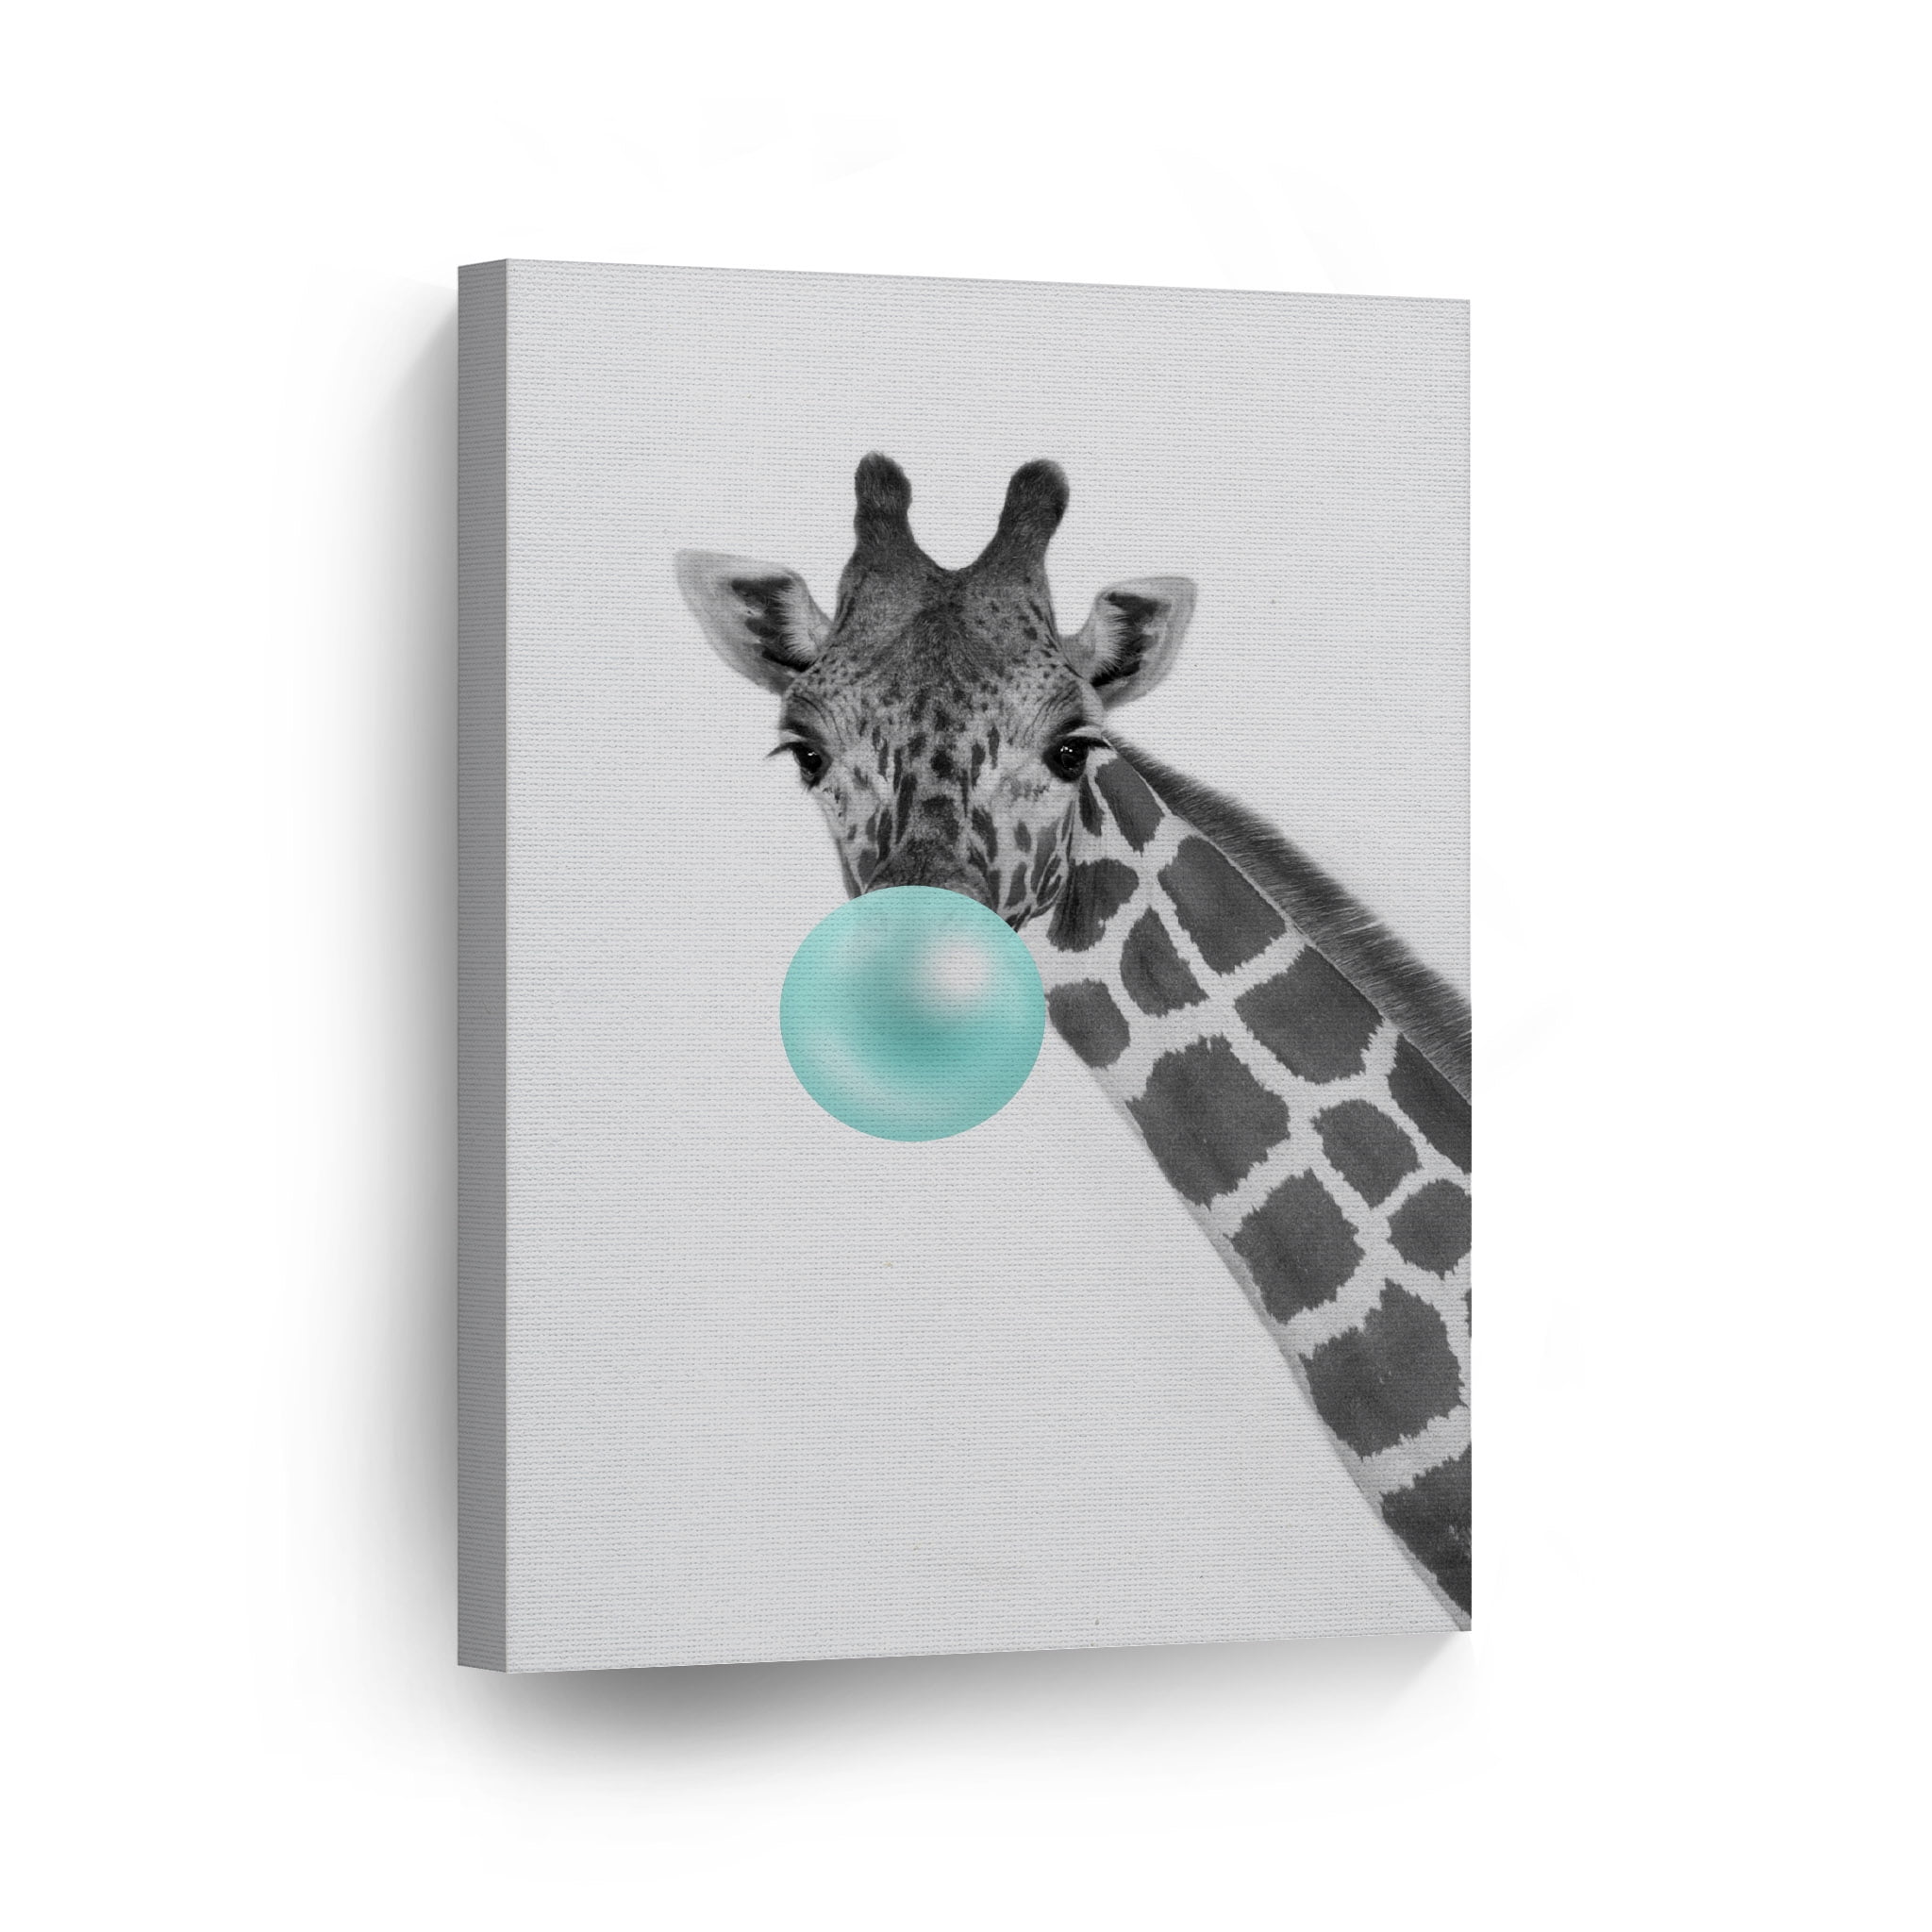 Smile Art Design Giraffe Animal Bubble Gum Art Turquoise Teal Blue CANVAS  PRINT Black and White Wall Art Home Pop Art Living Room Kids Room Decor  Nursery Ready to Hang Made in